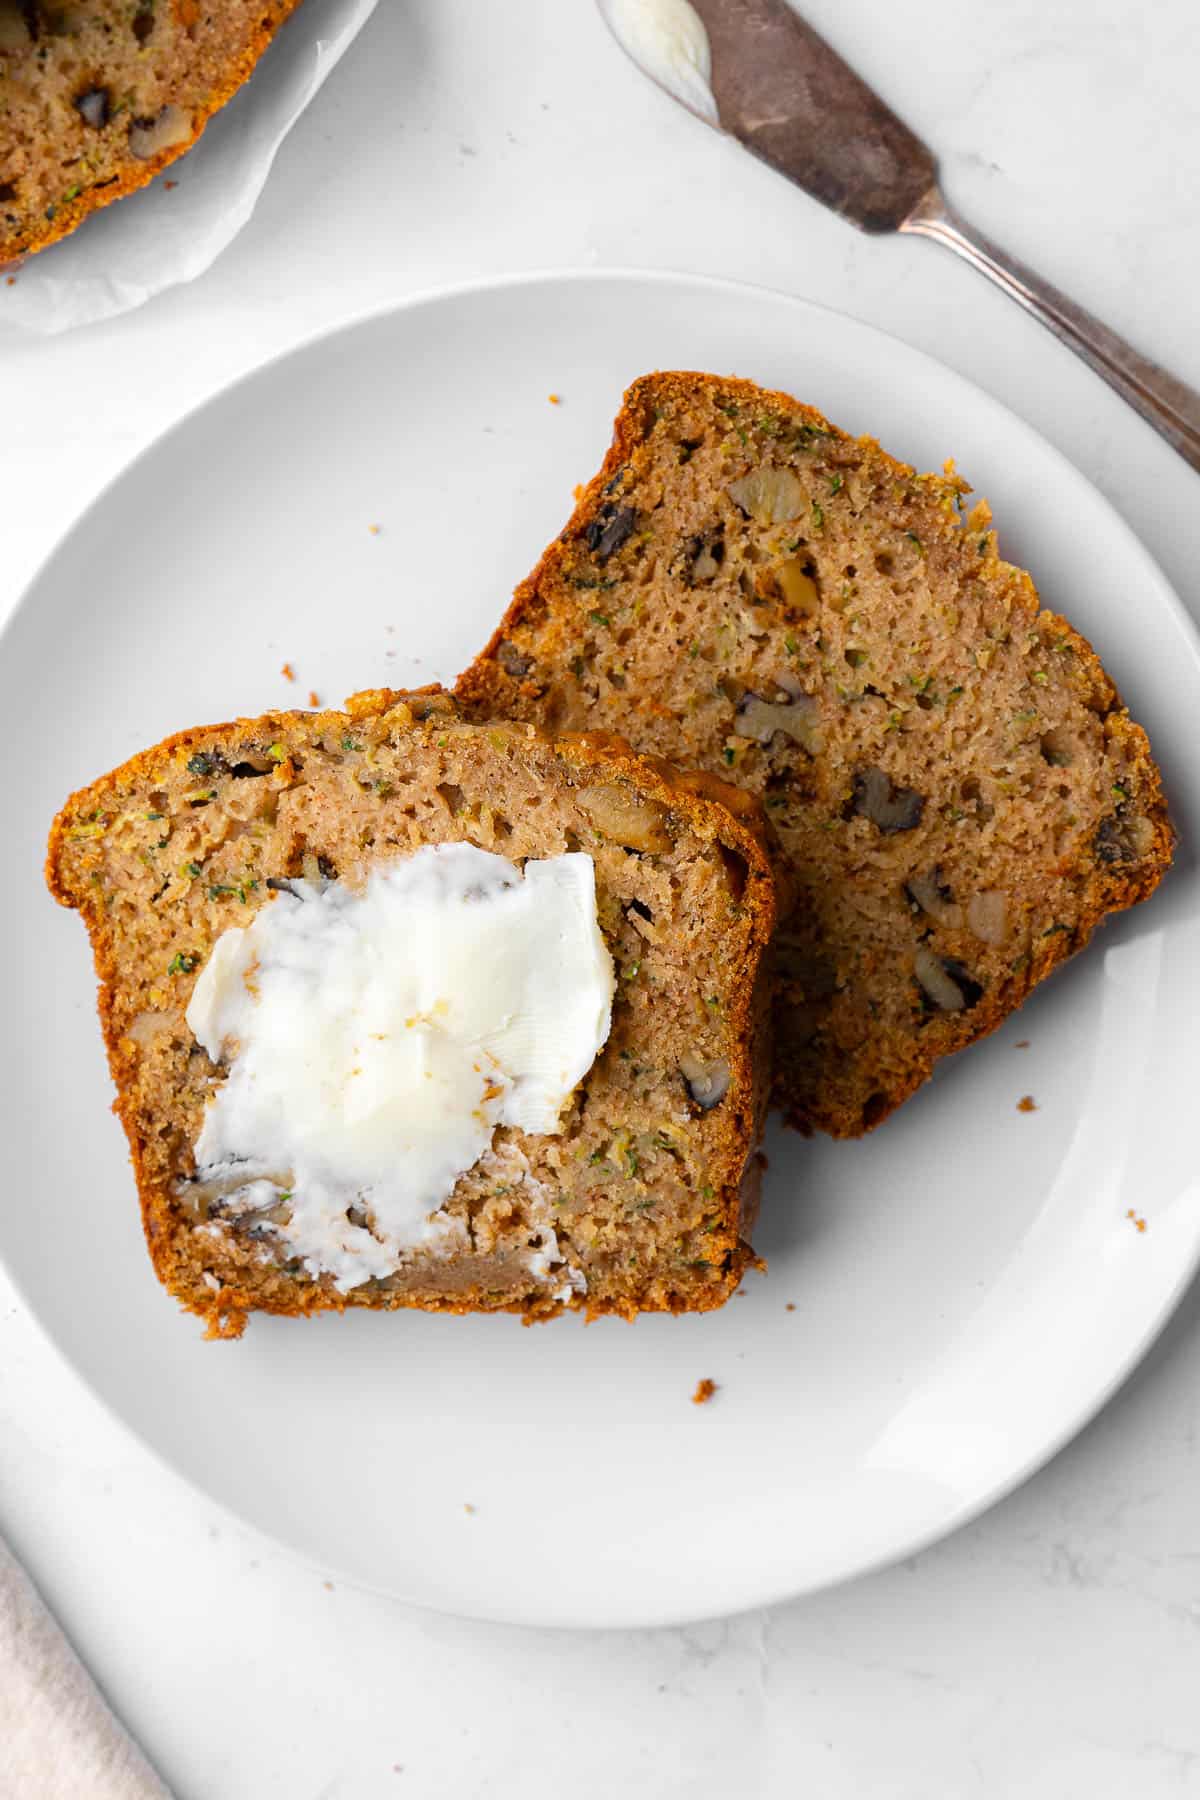 Zucchini bread slices on a plate, one smeared with butter.